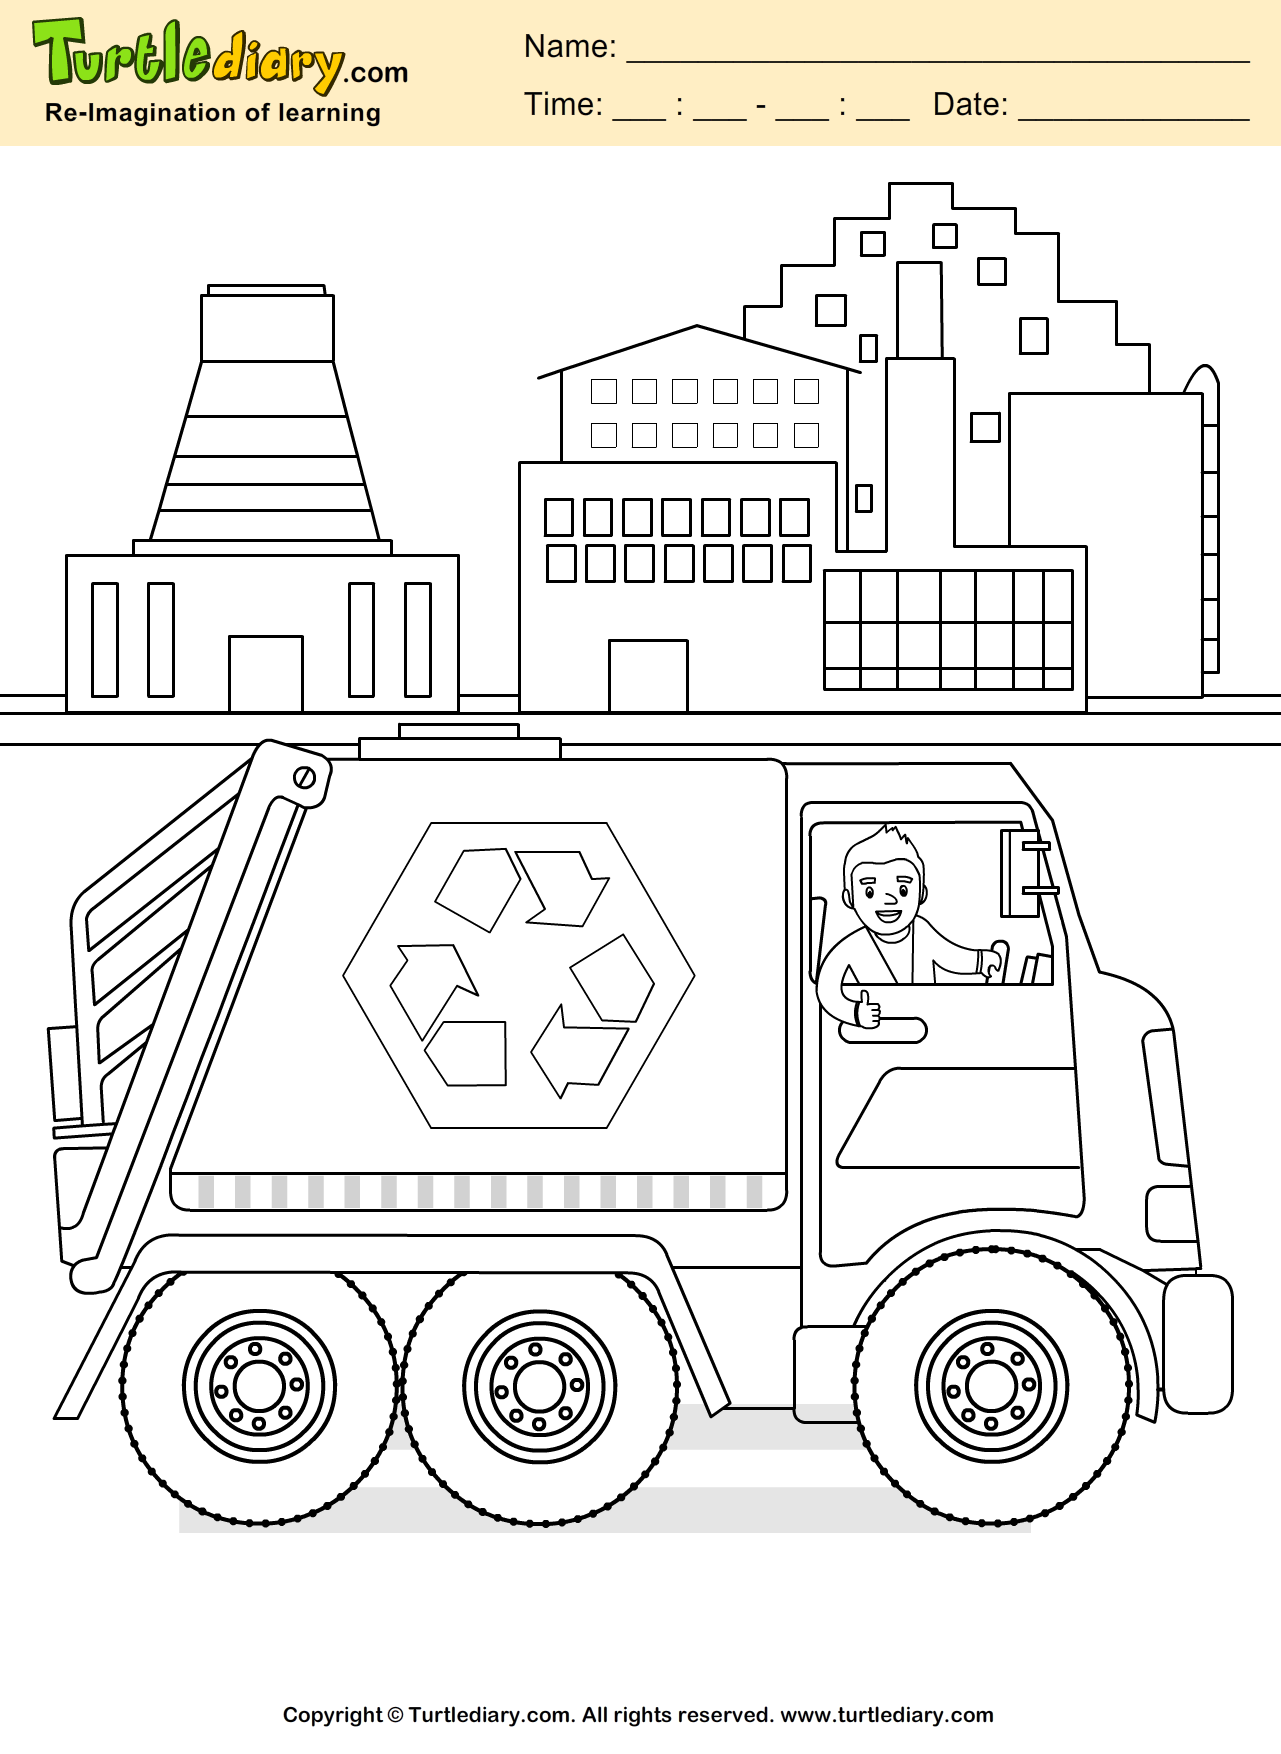 Recycling coloring page coloring sheet coloring pages coloring sheets for kids coloring sheets